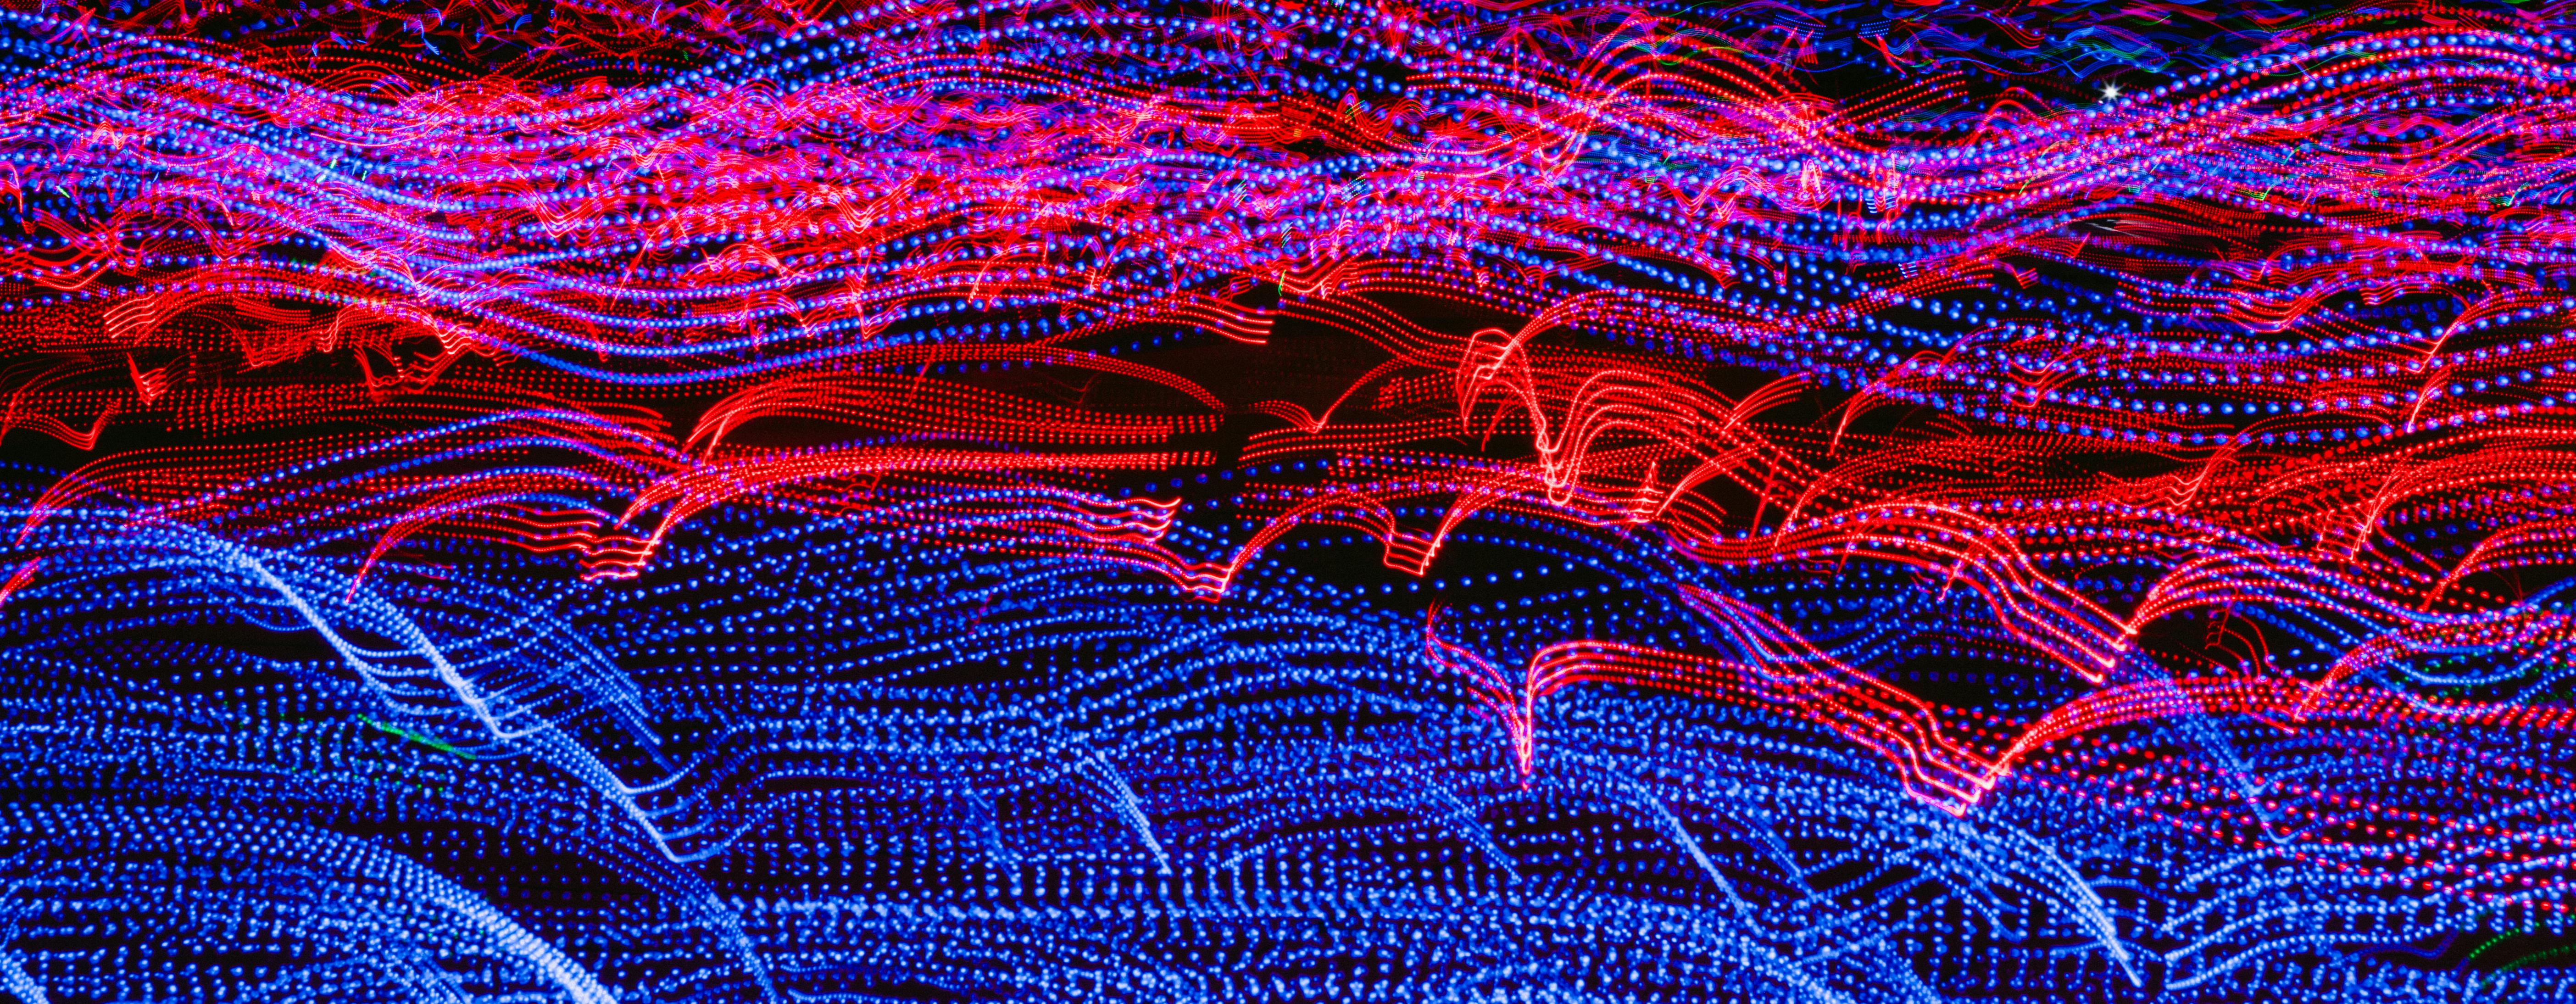 Red and Blue Digital Wallpaper · Free Stock Photo